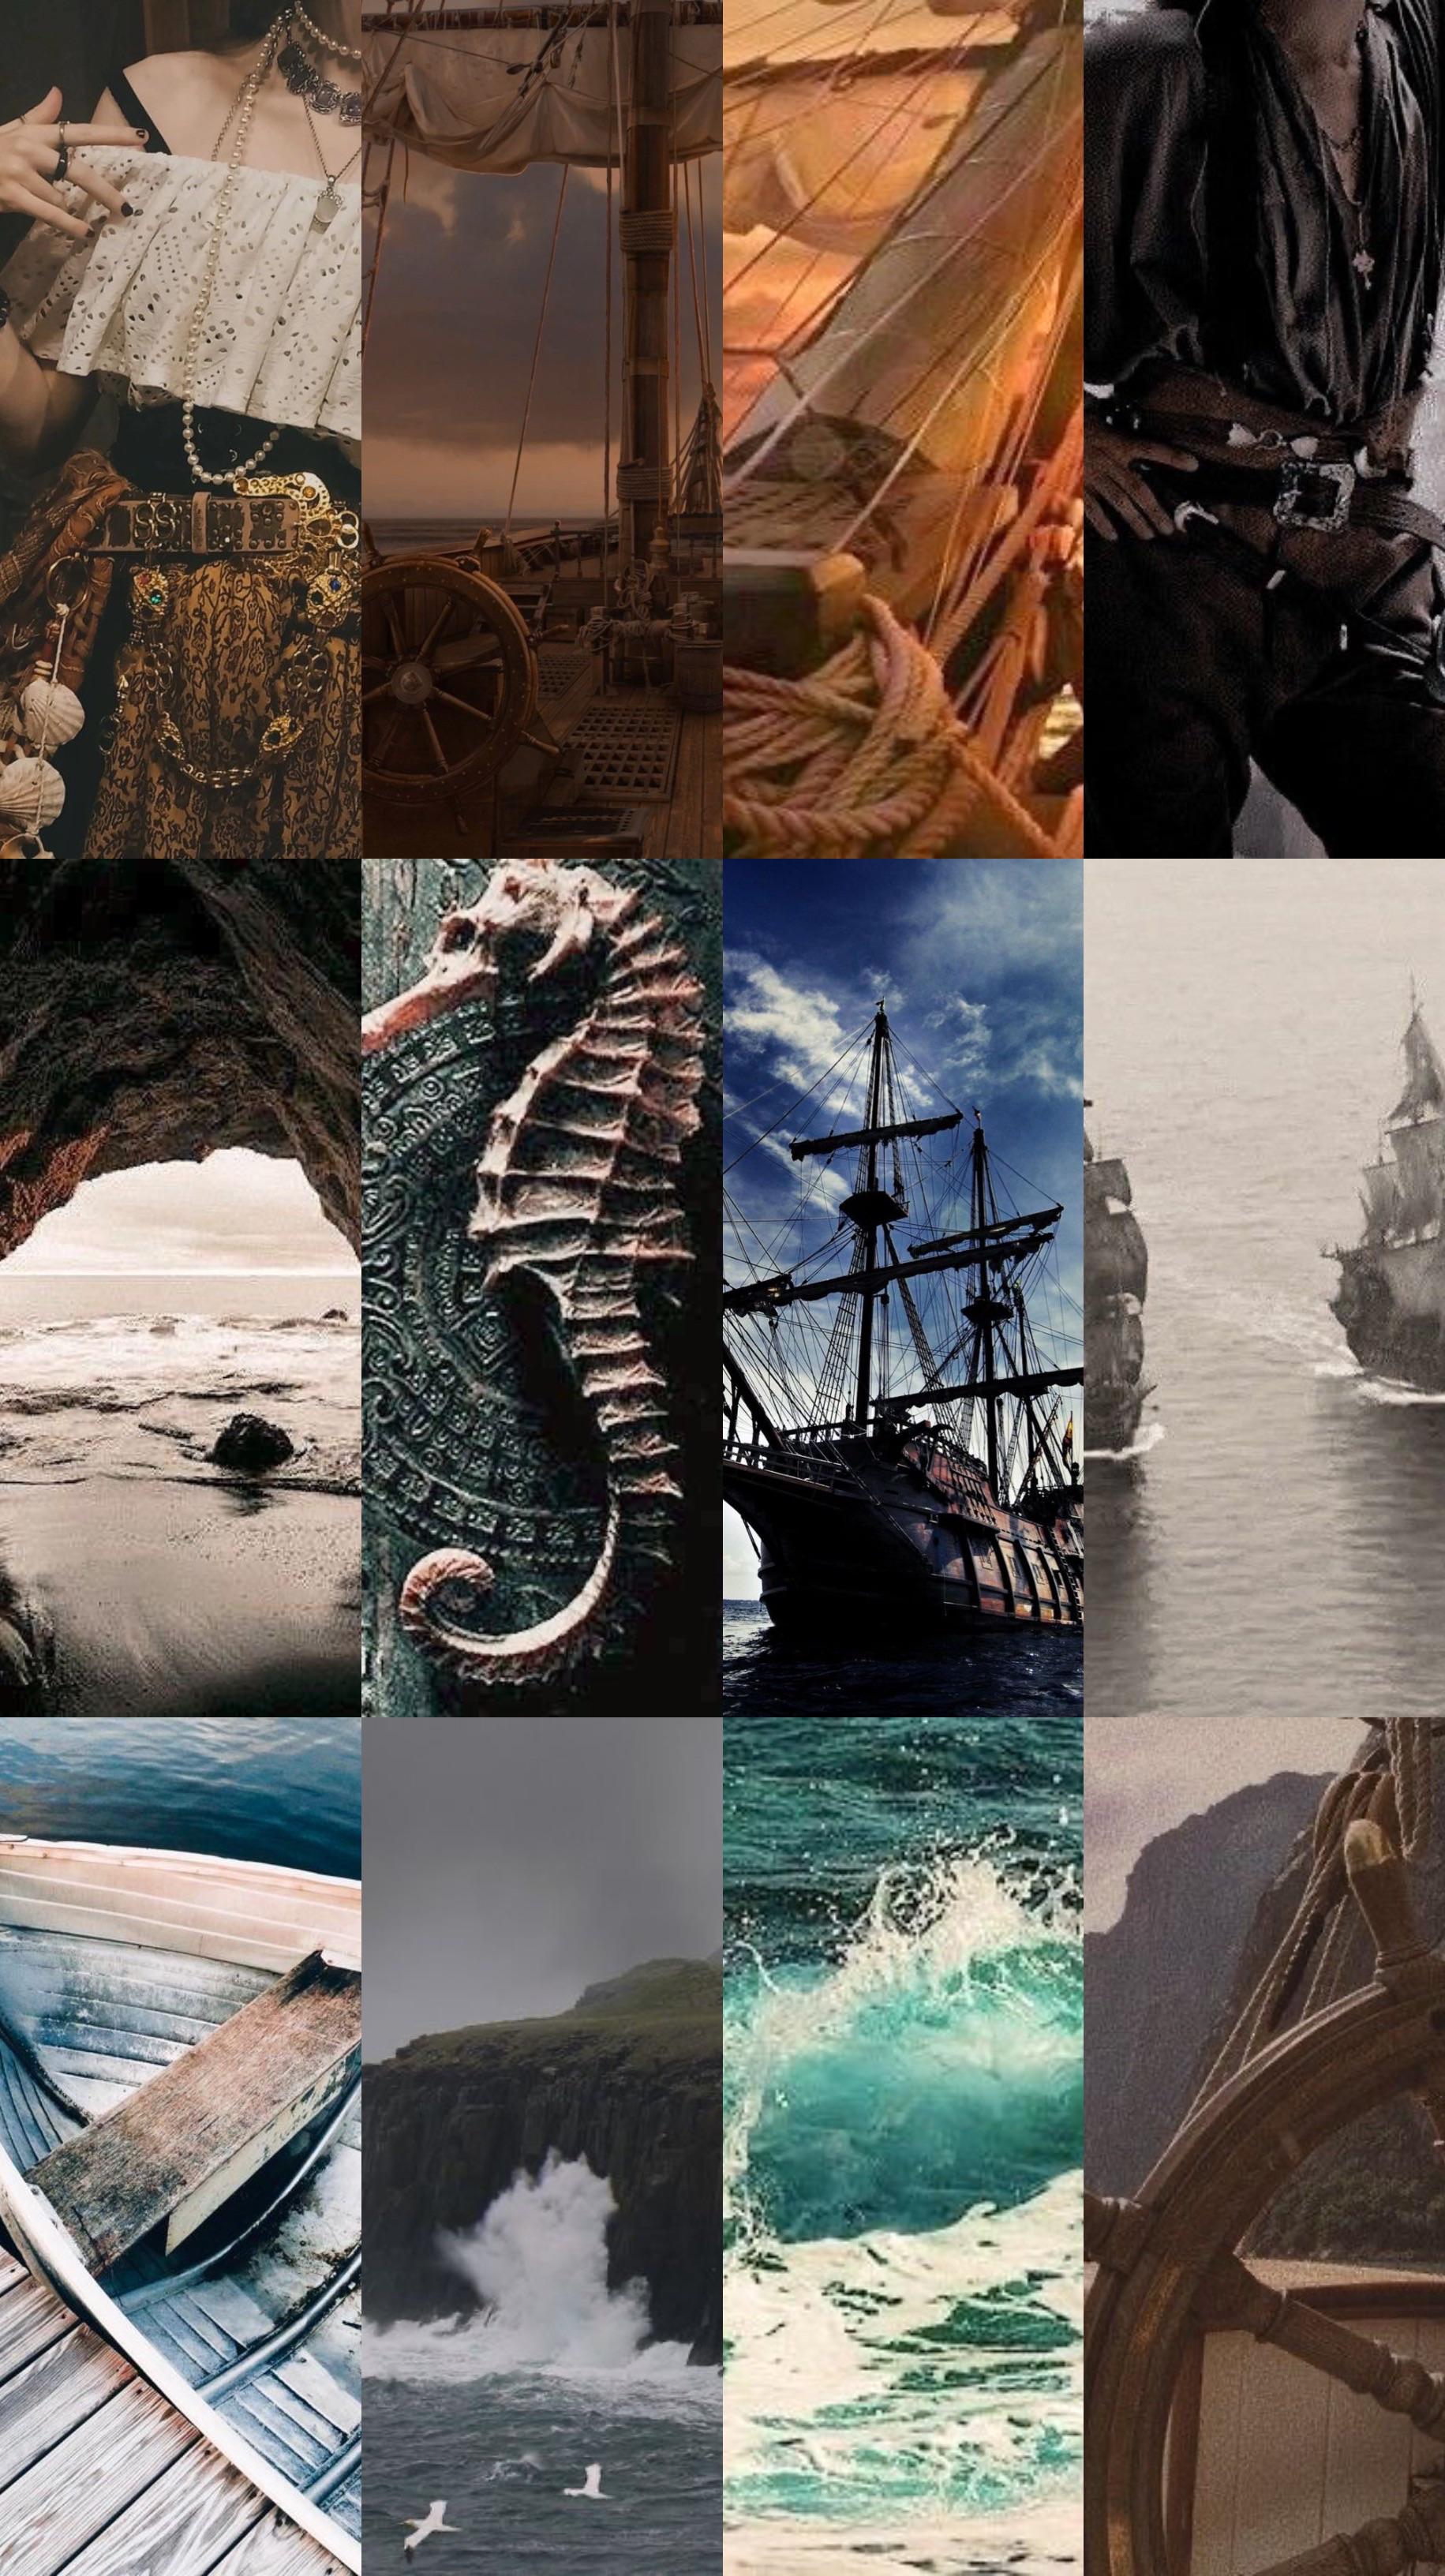 A collage of images related to the theme of the sea. - Pirate